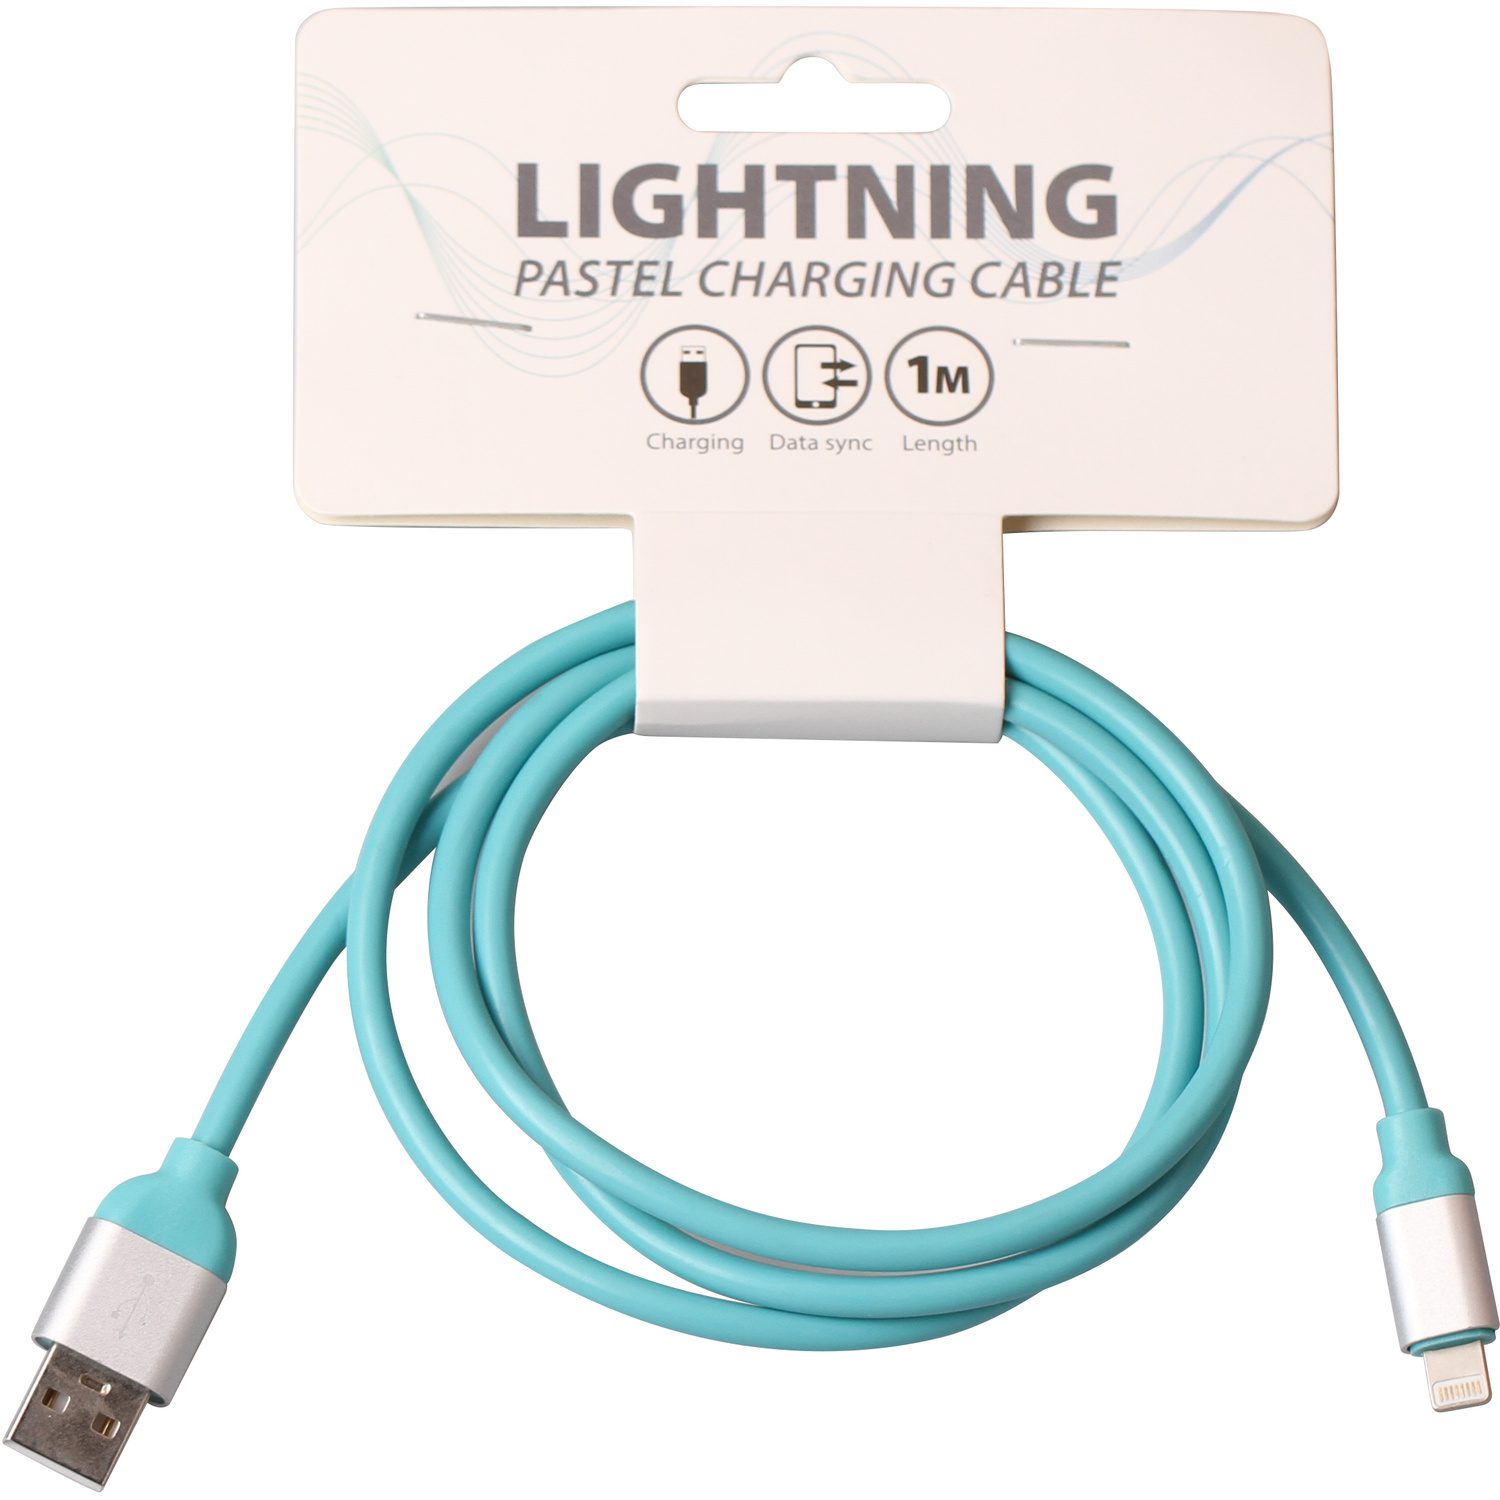 Lightning Pastel Charging Cable Image 2